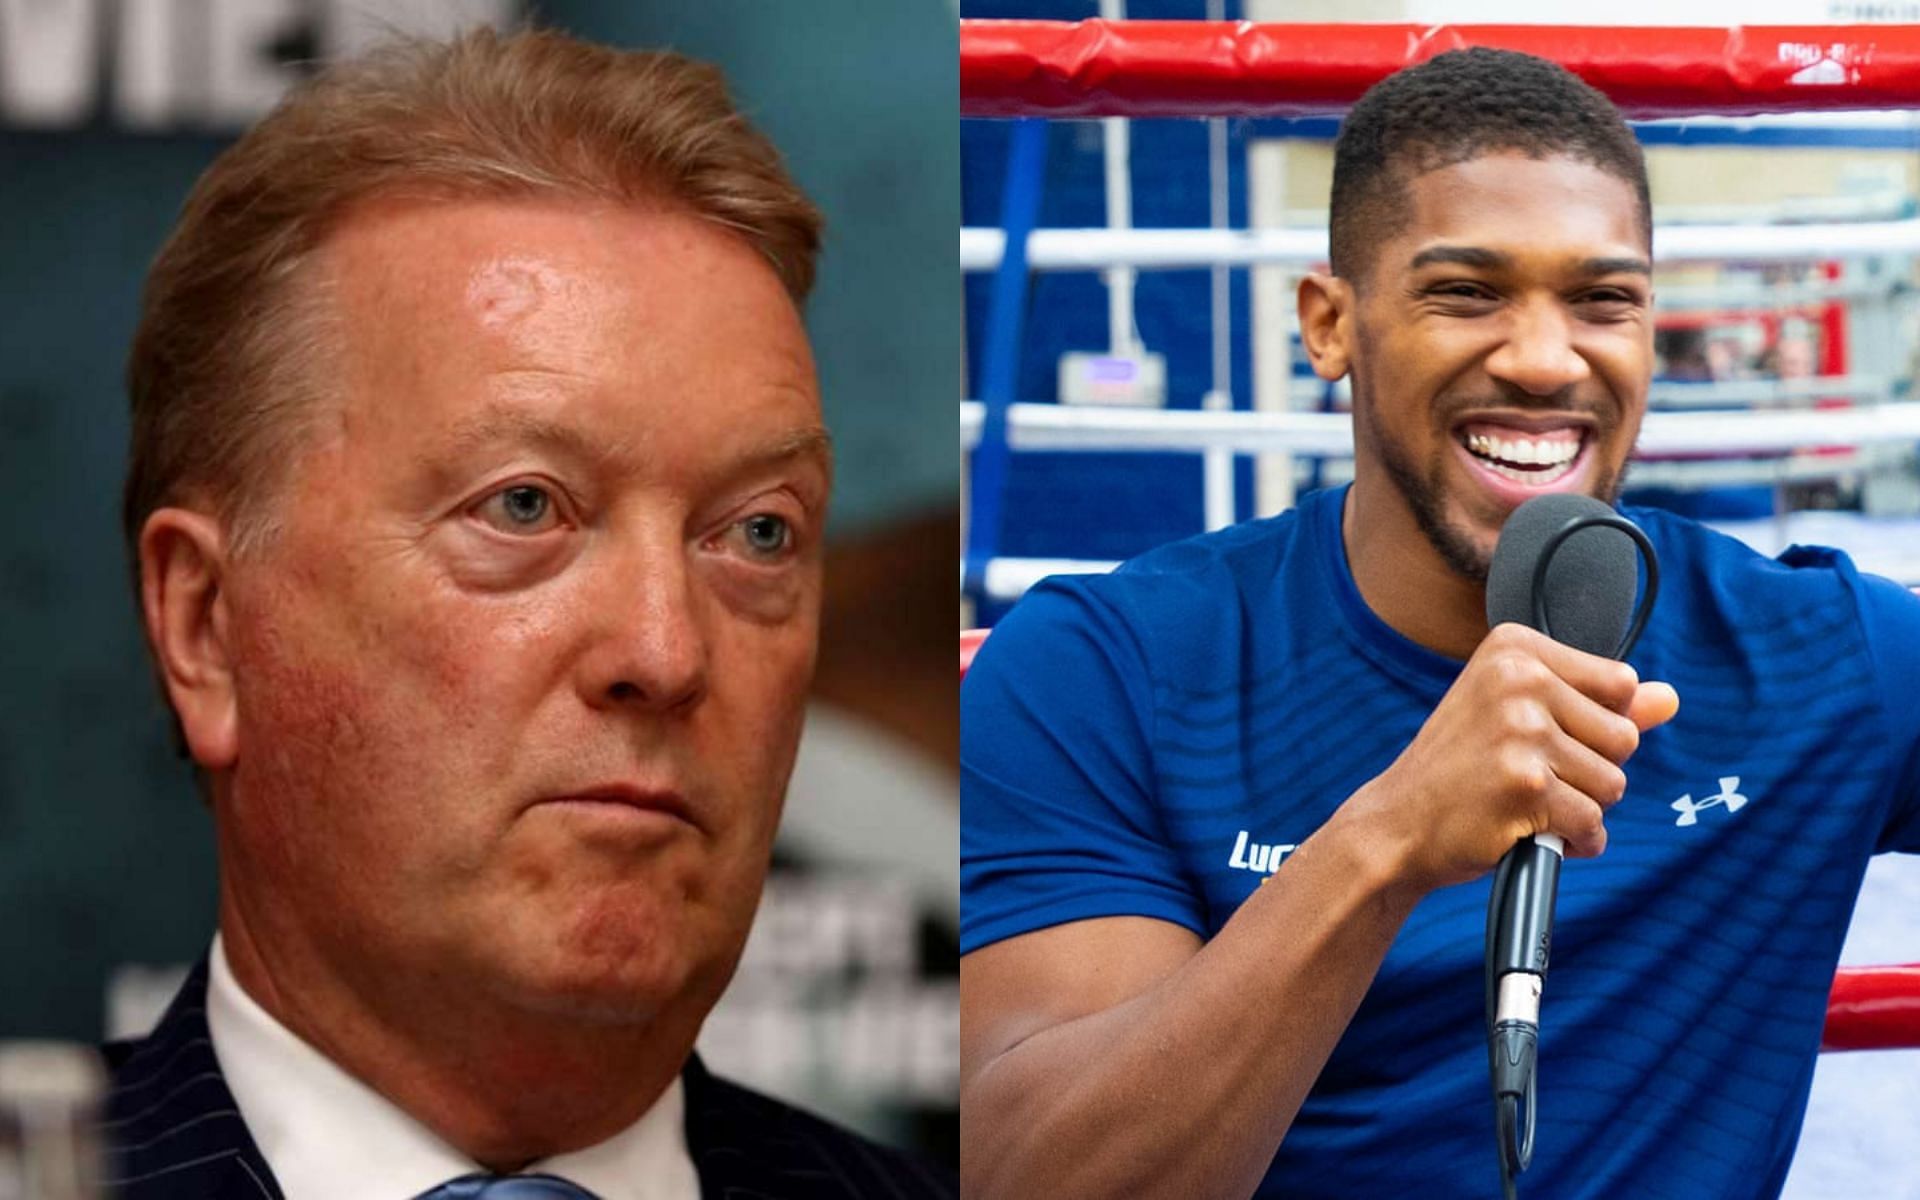 Frank Warren (right) and Anthony Joshua (left)